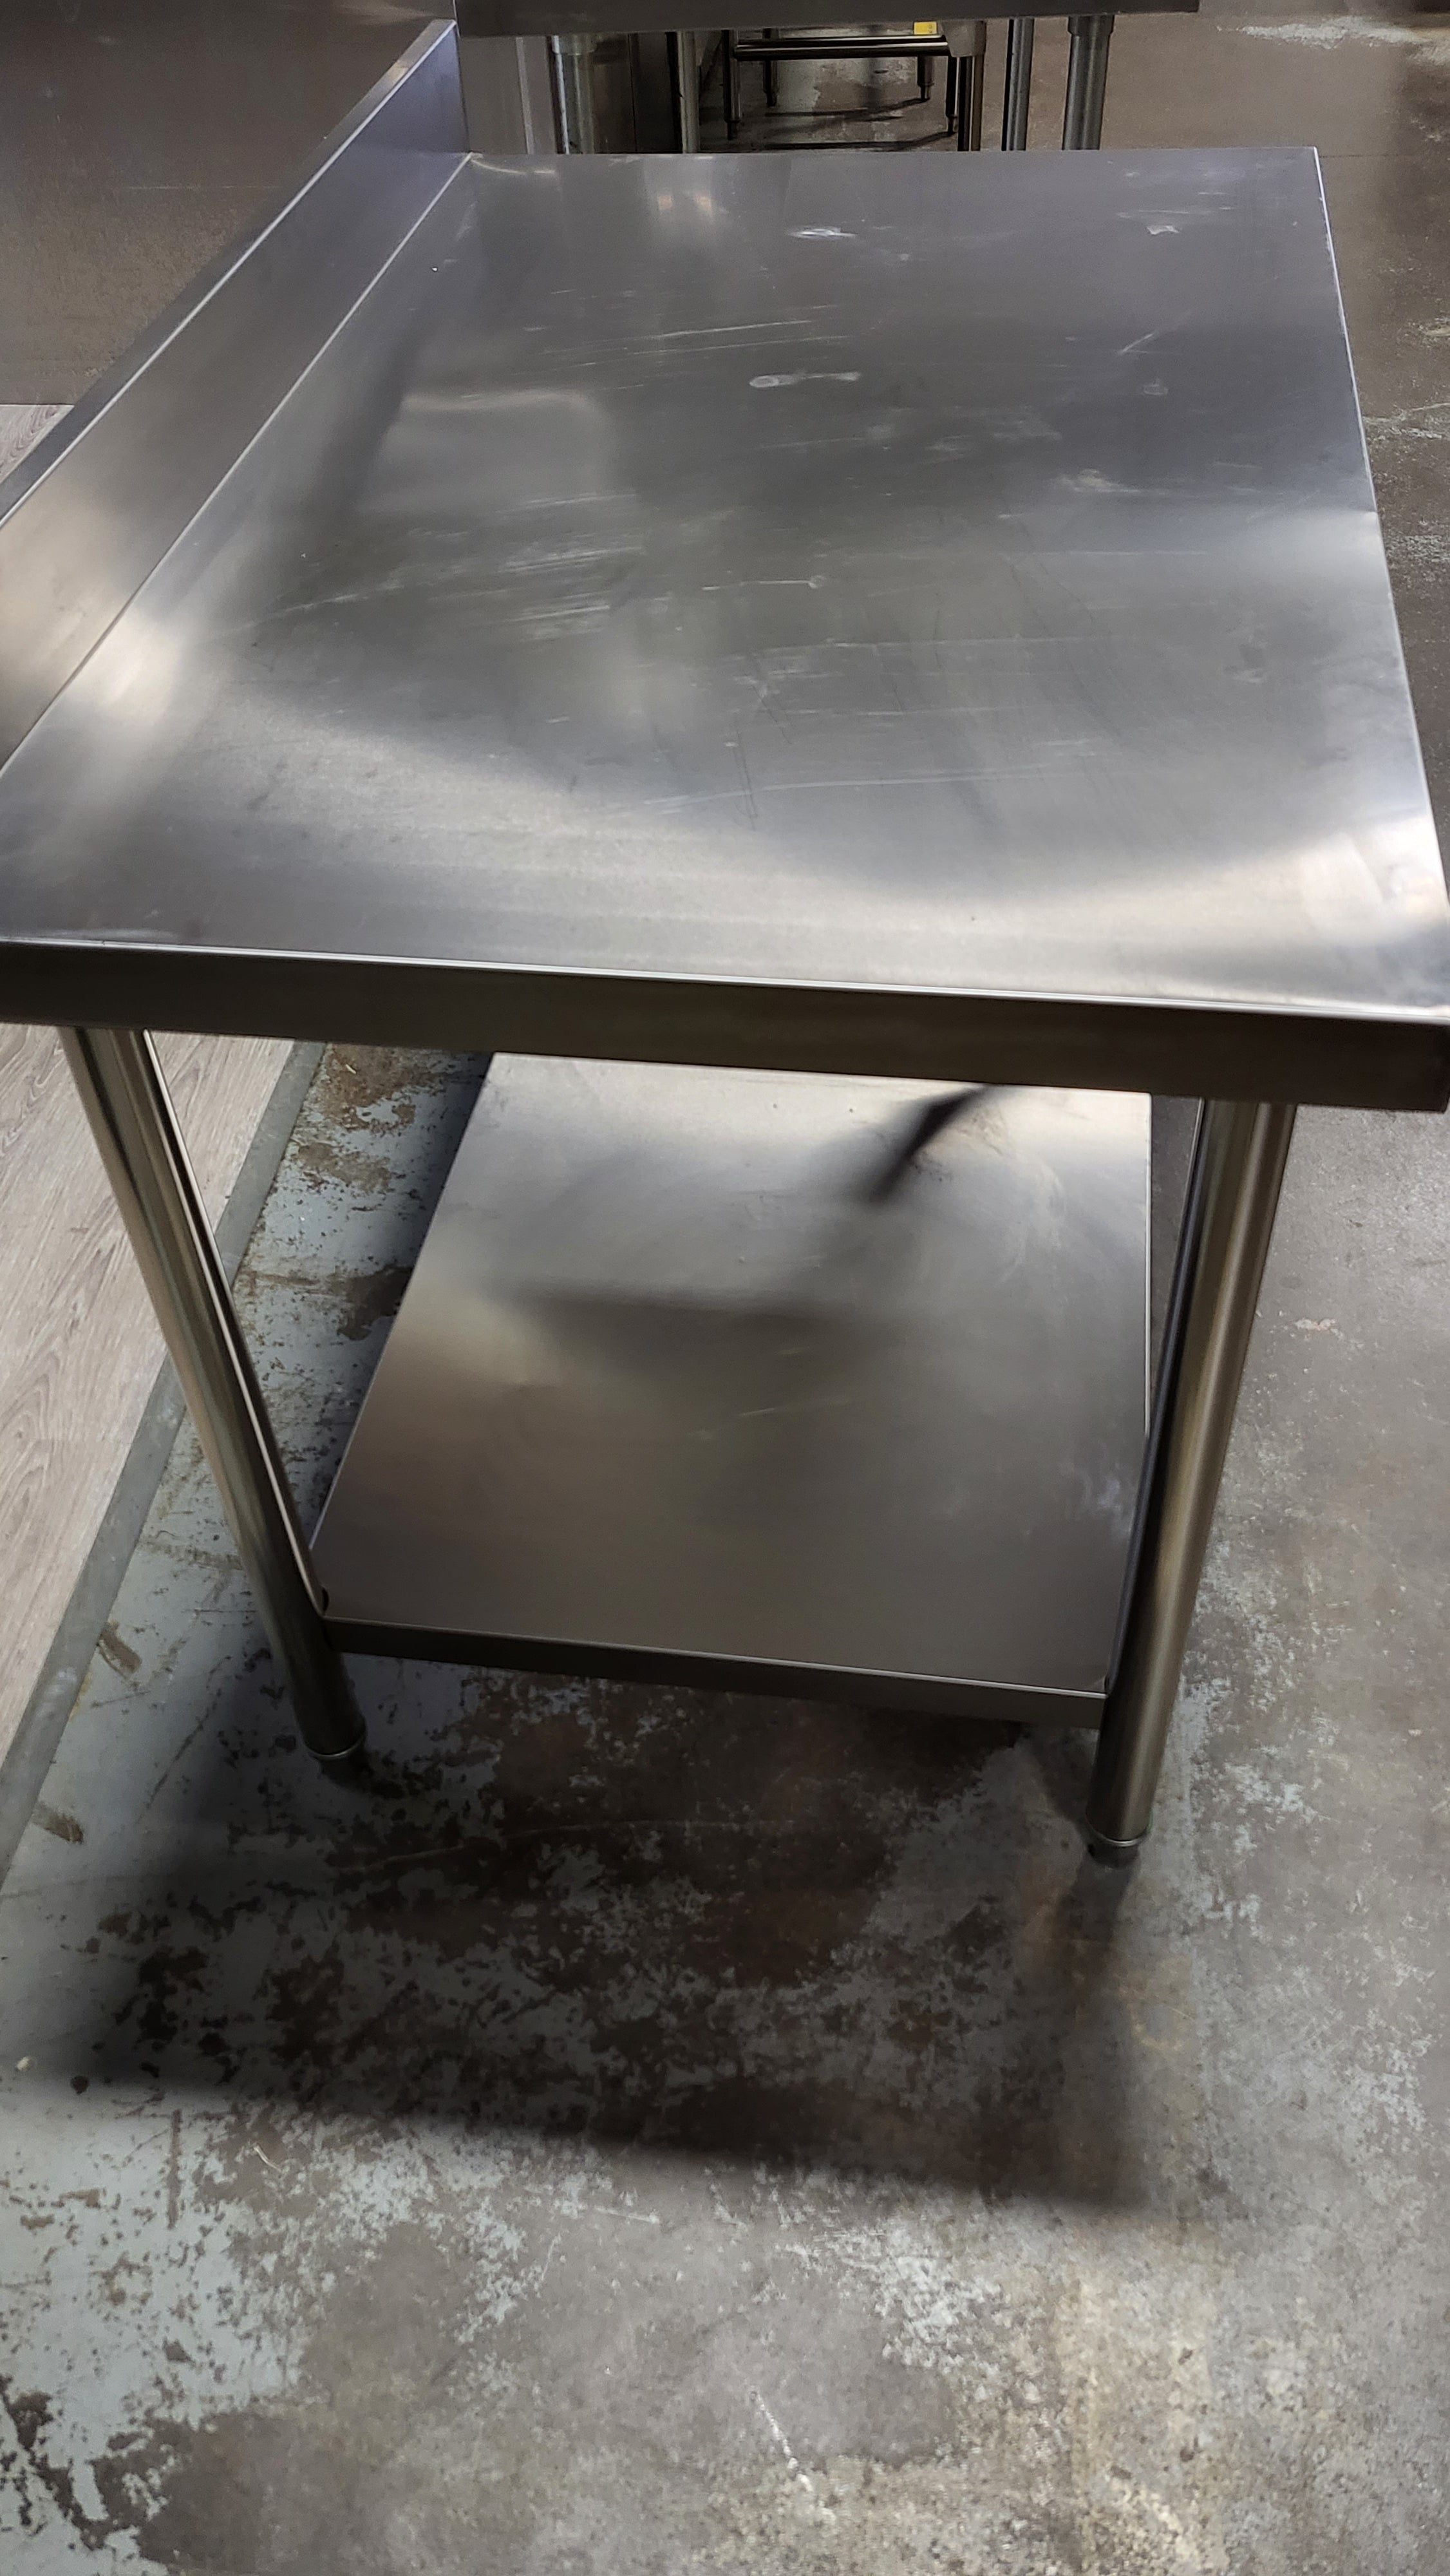 Thumbnail - Omcan Stainless Steel Table With Backsplash 42 x 48